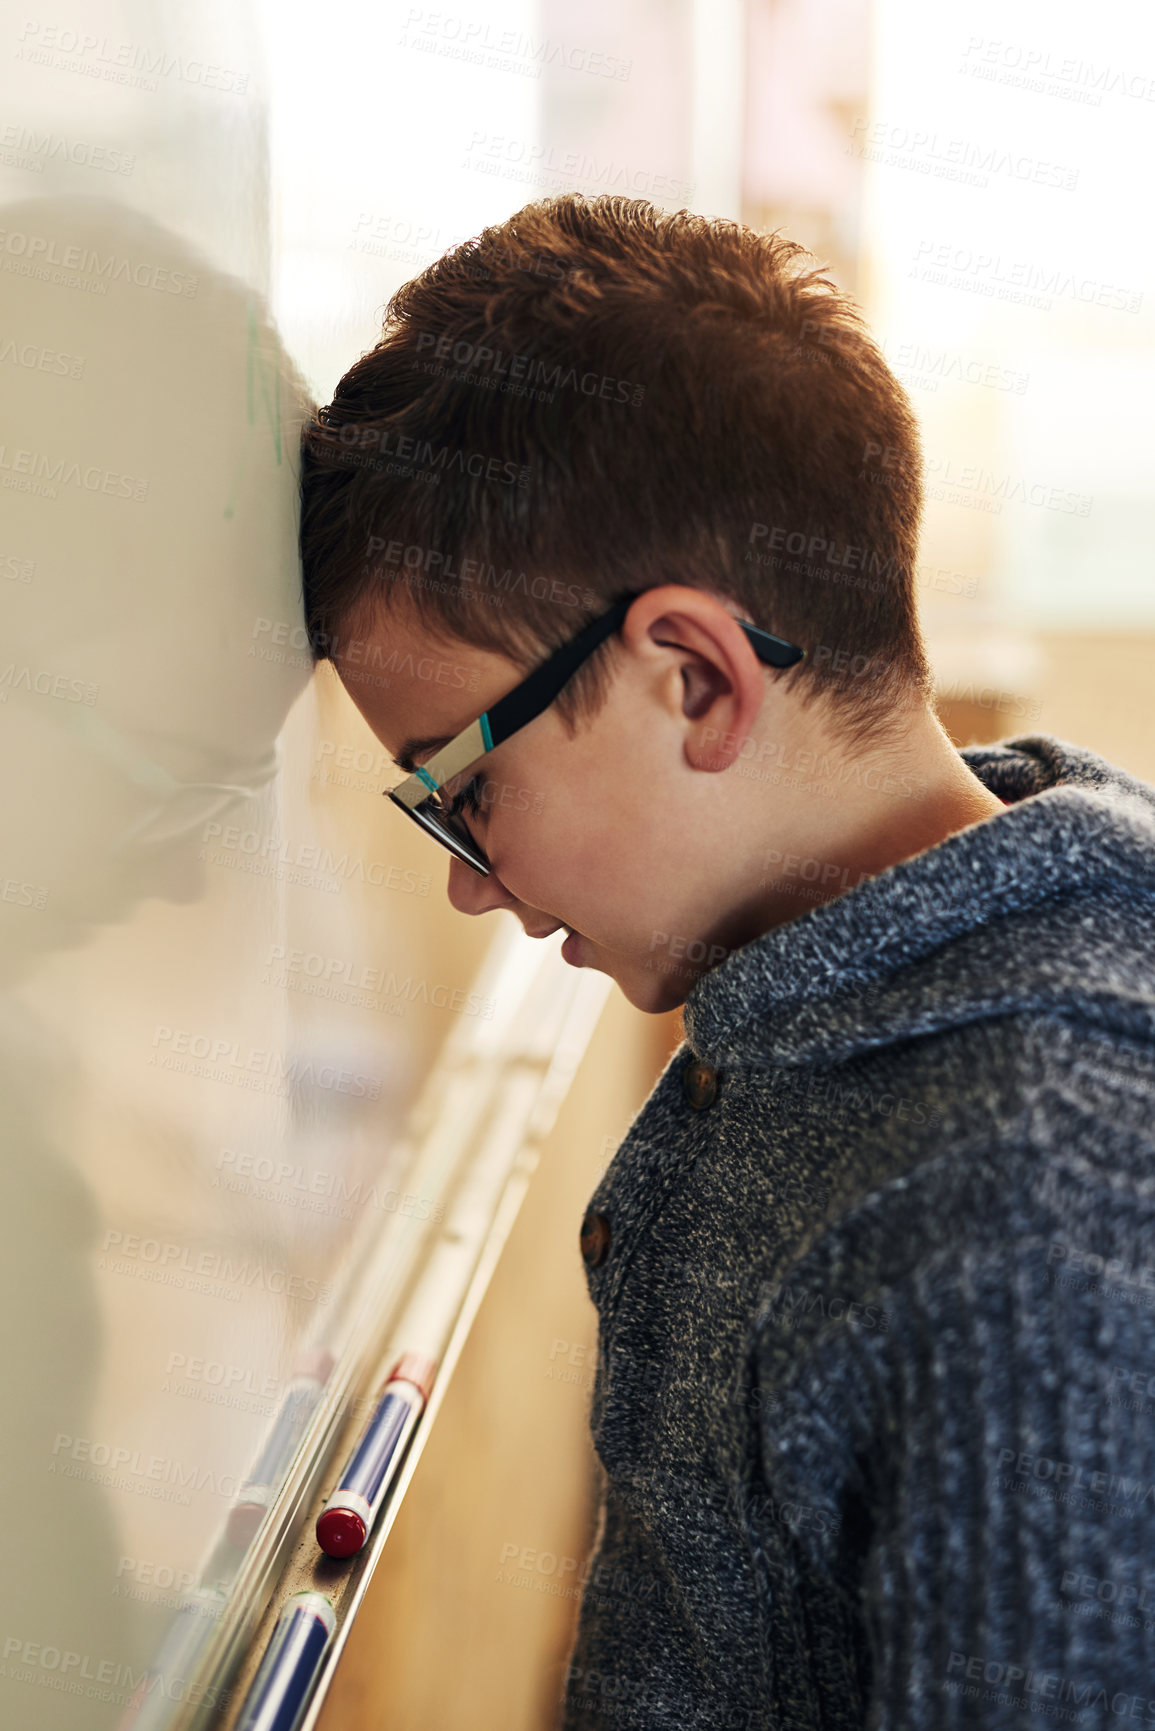 Buy stock photo Shot of an elementary school boy leaning with his head on the whiteboard in class